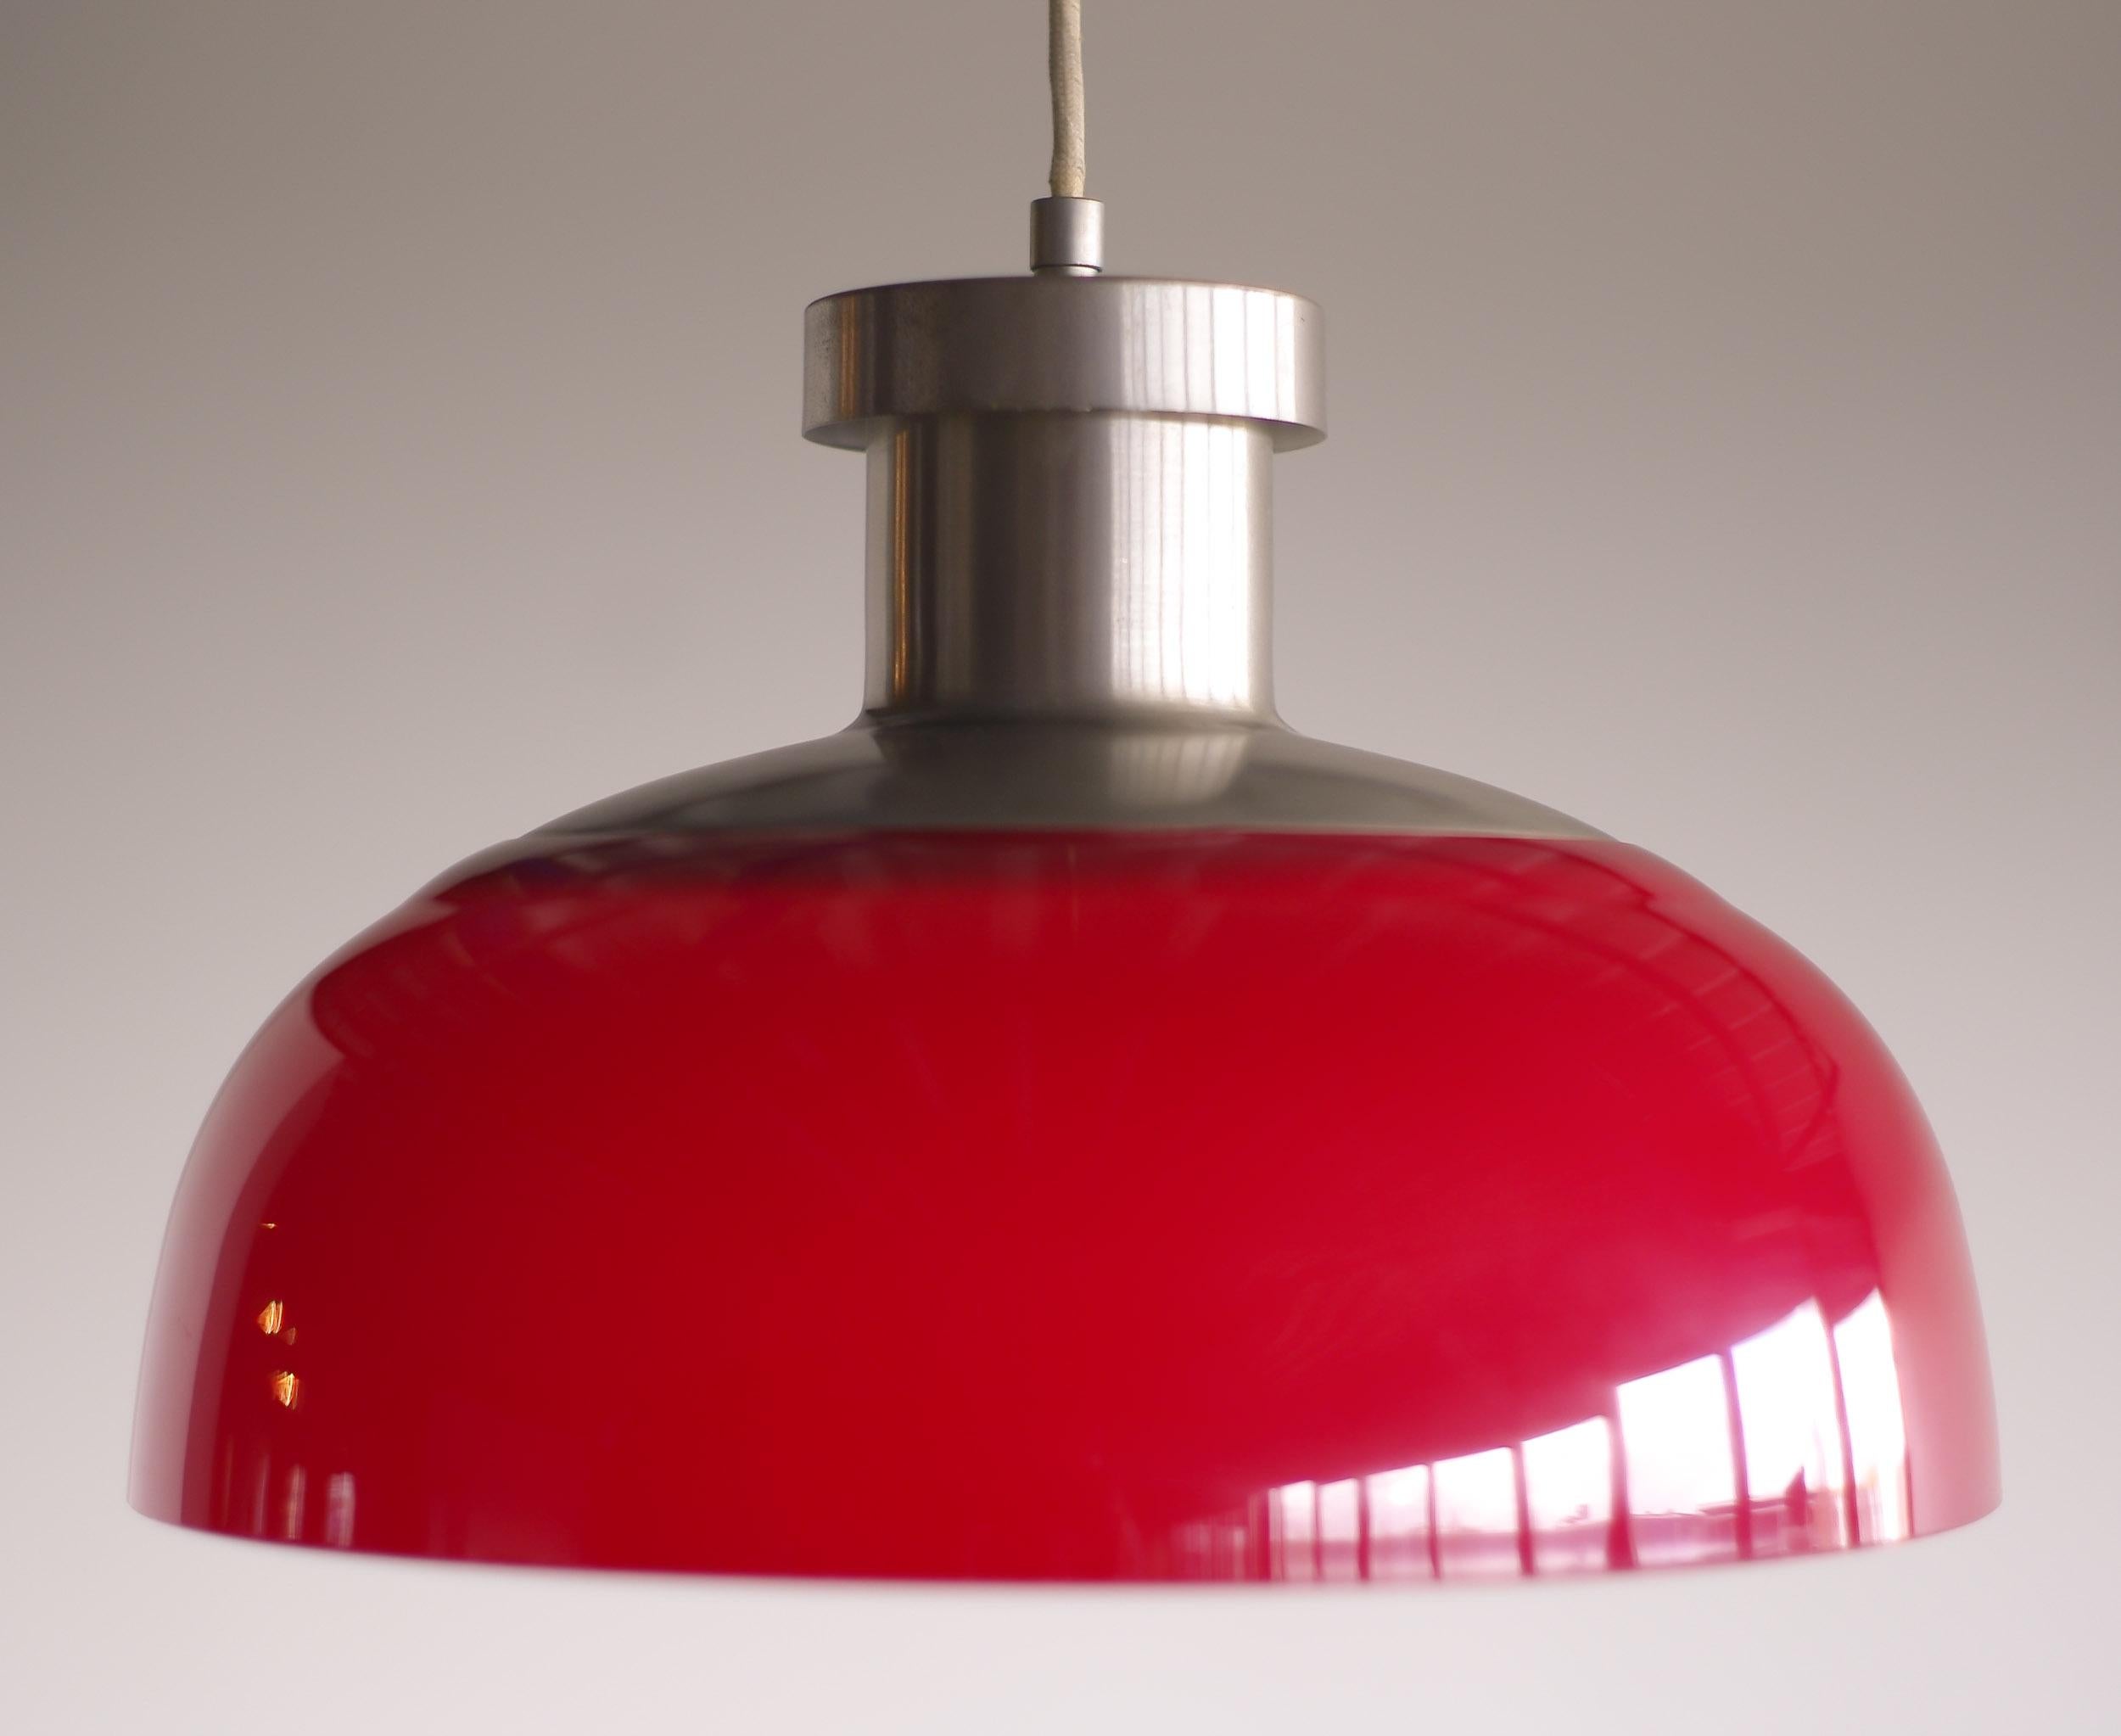 This rare pendant was the first lighting design by Achille Castiglioni.
Made of nickel-plated steel with an acrylic shade this light looks very contemporary, but it is vintage Mid-Century Modern.